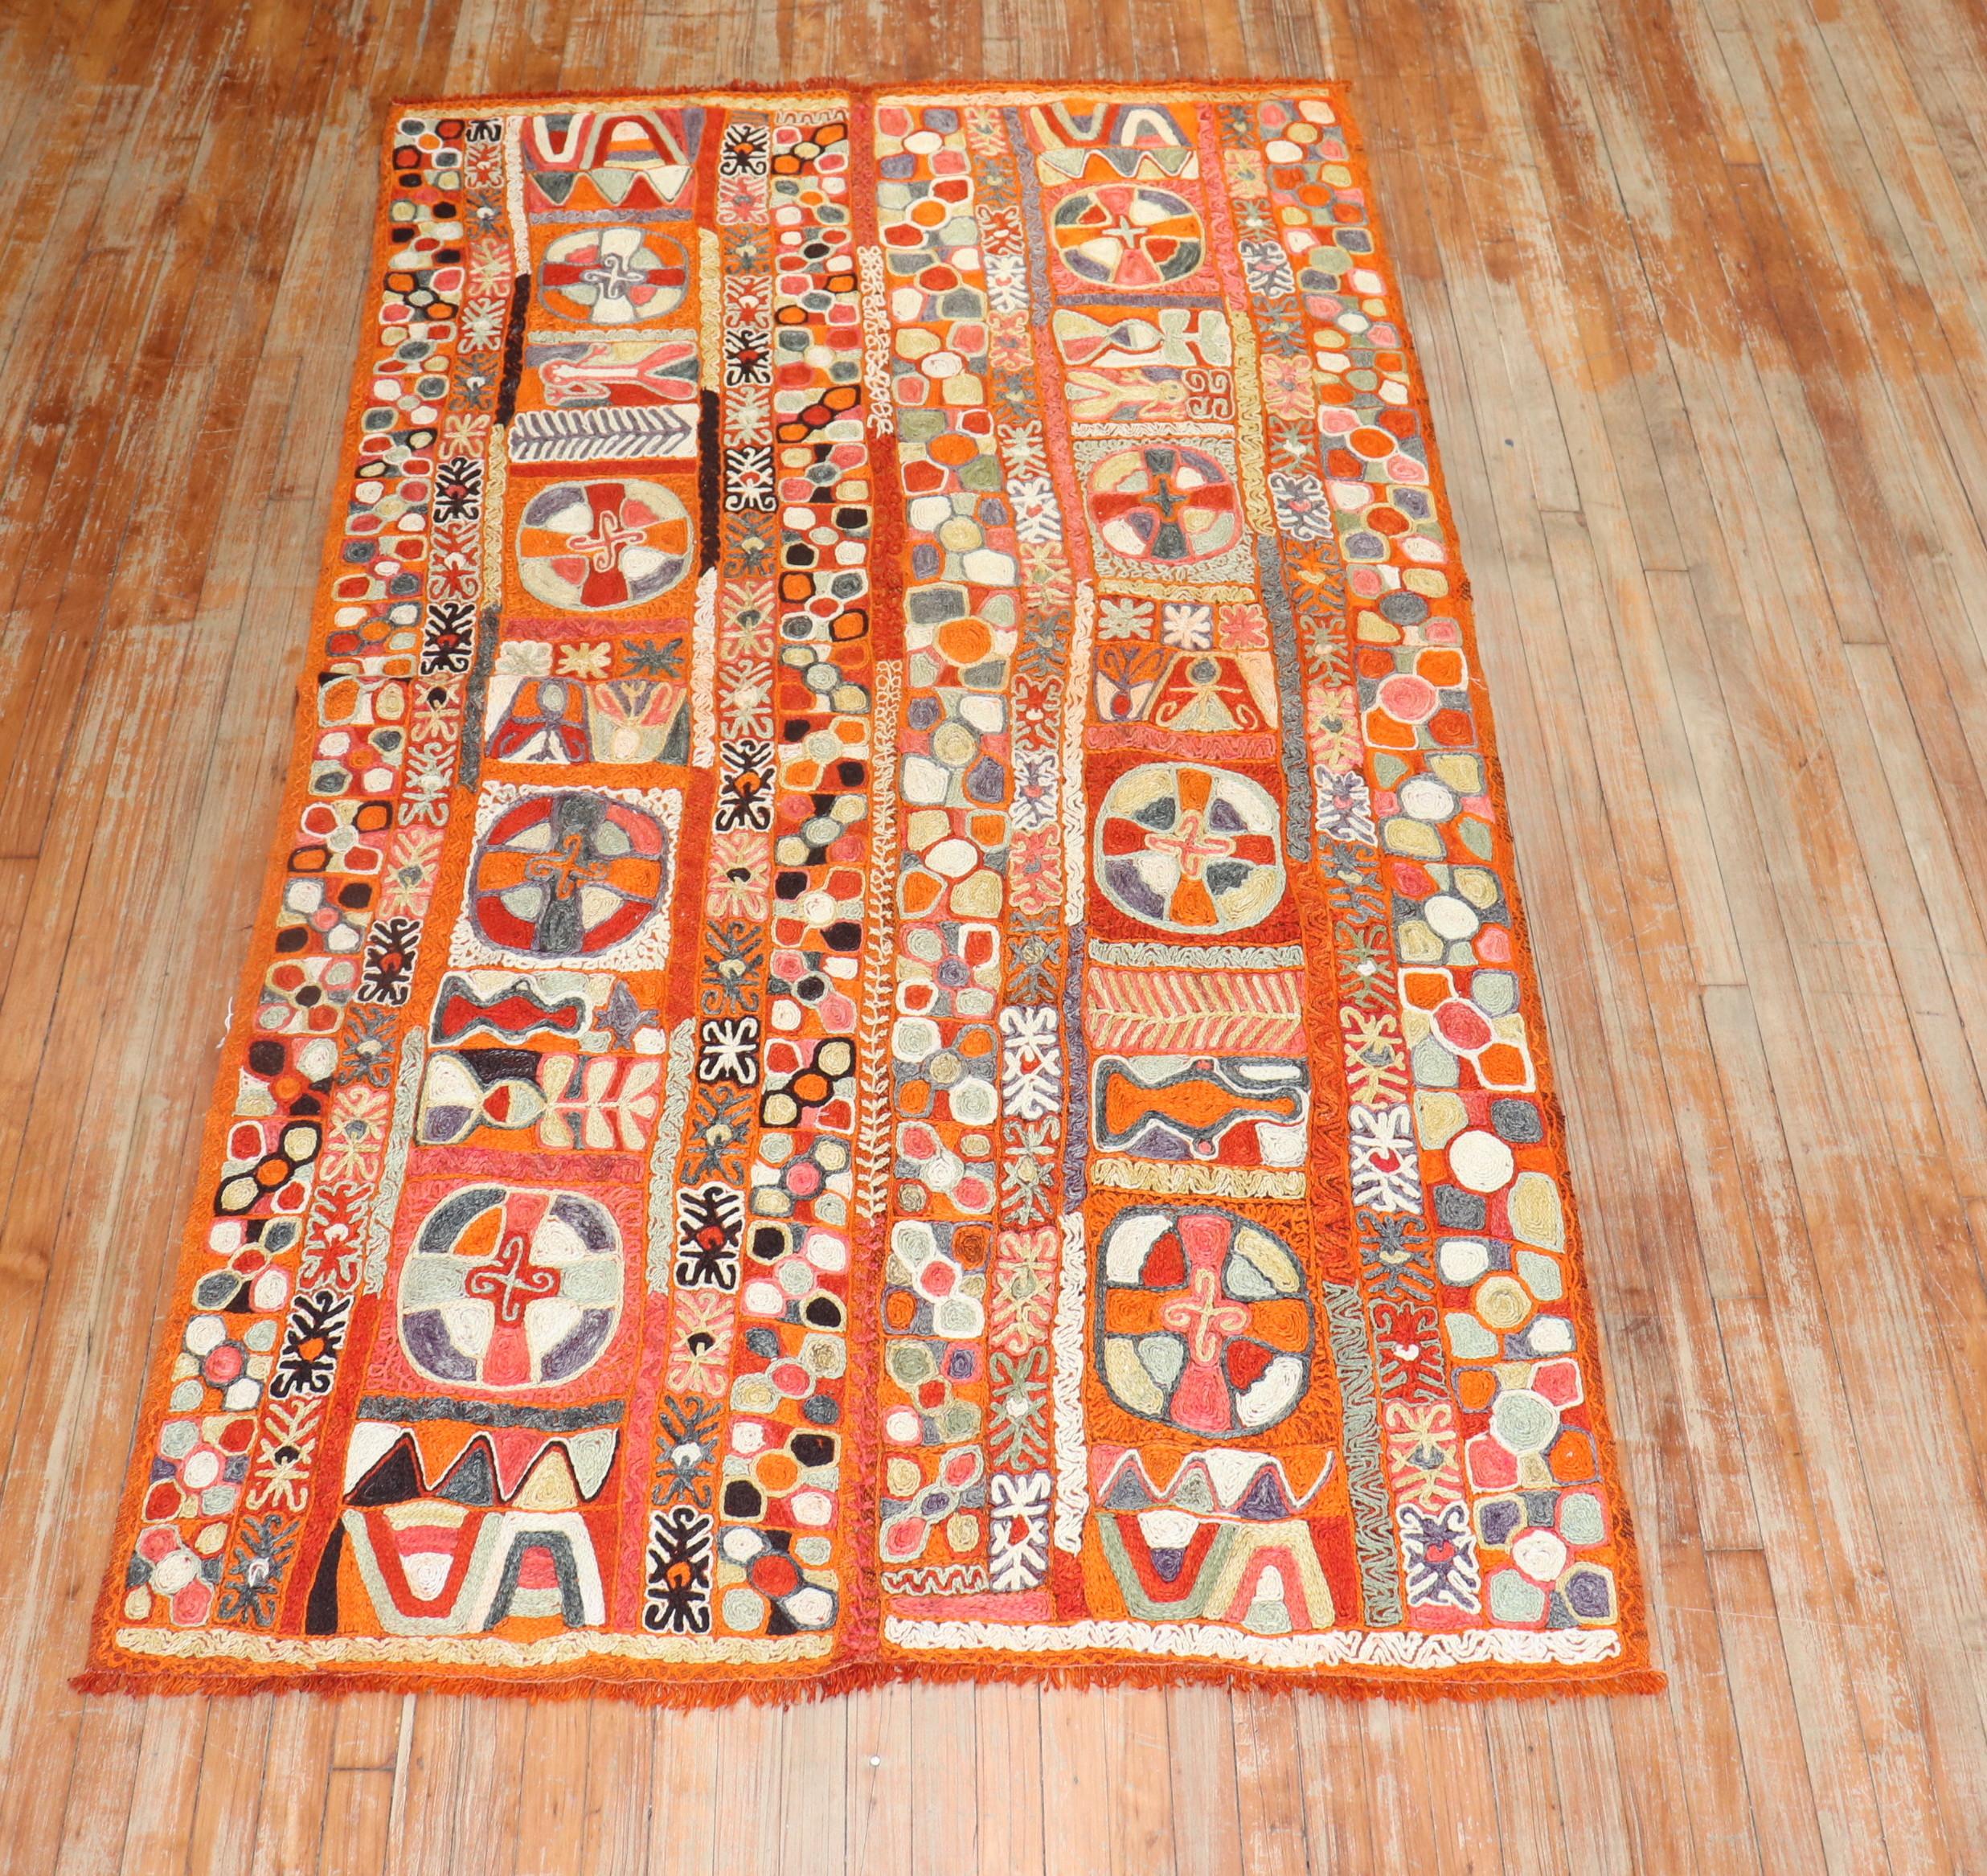 Pictorial Animal Vintage Iraqi Chainstitch Textile Rug For Sale 4